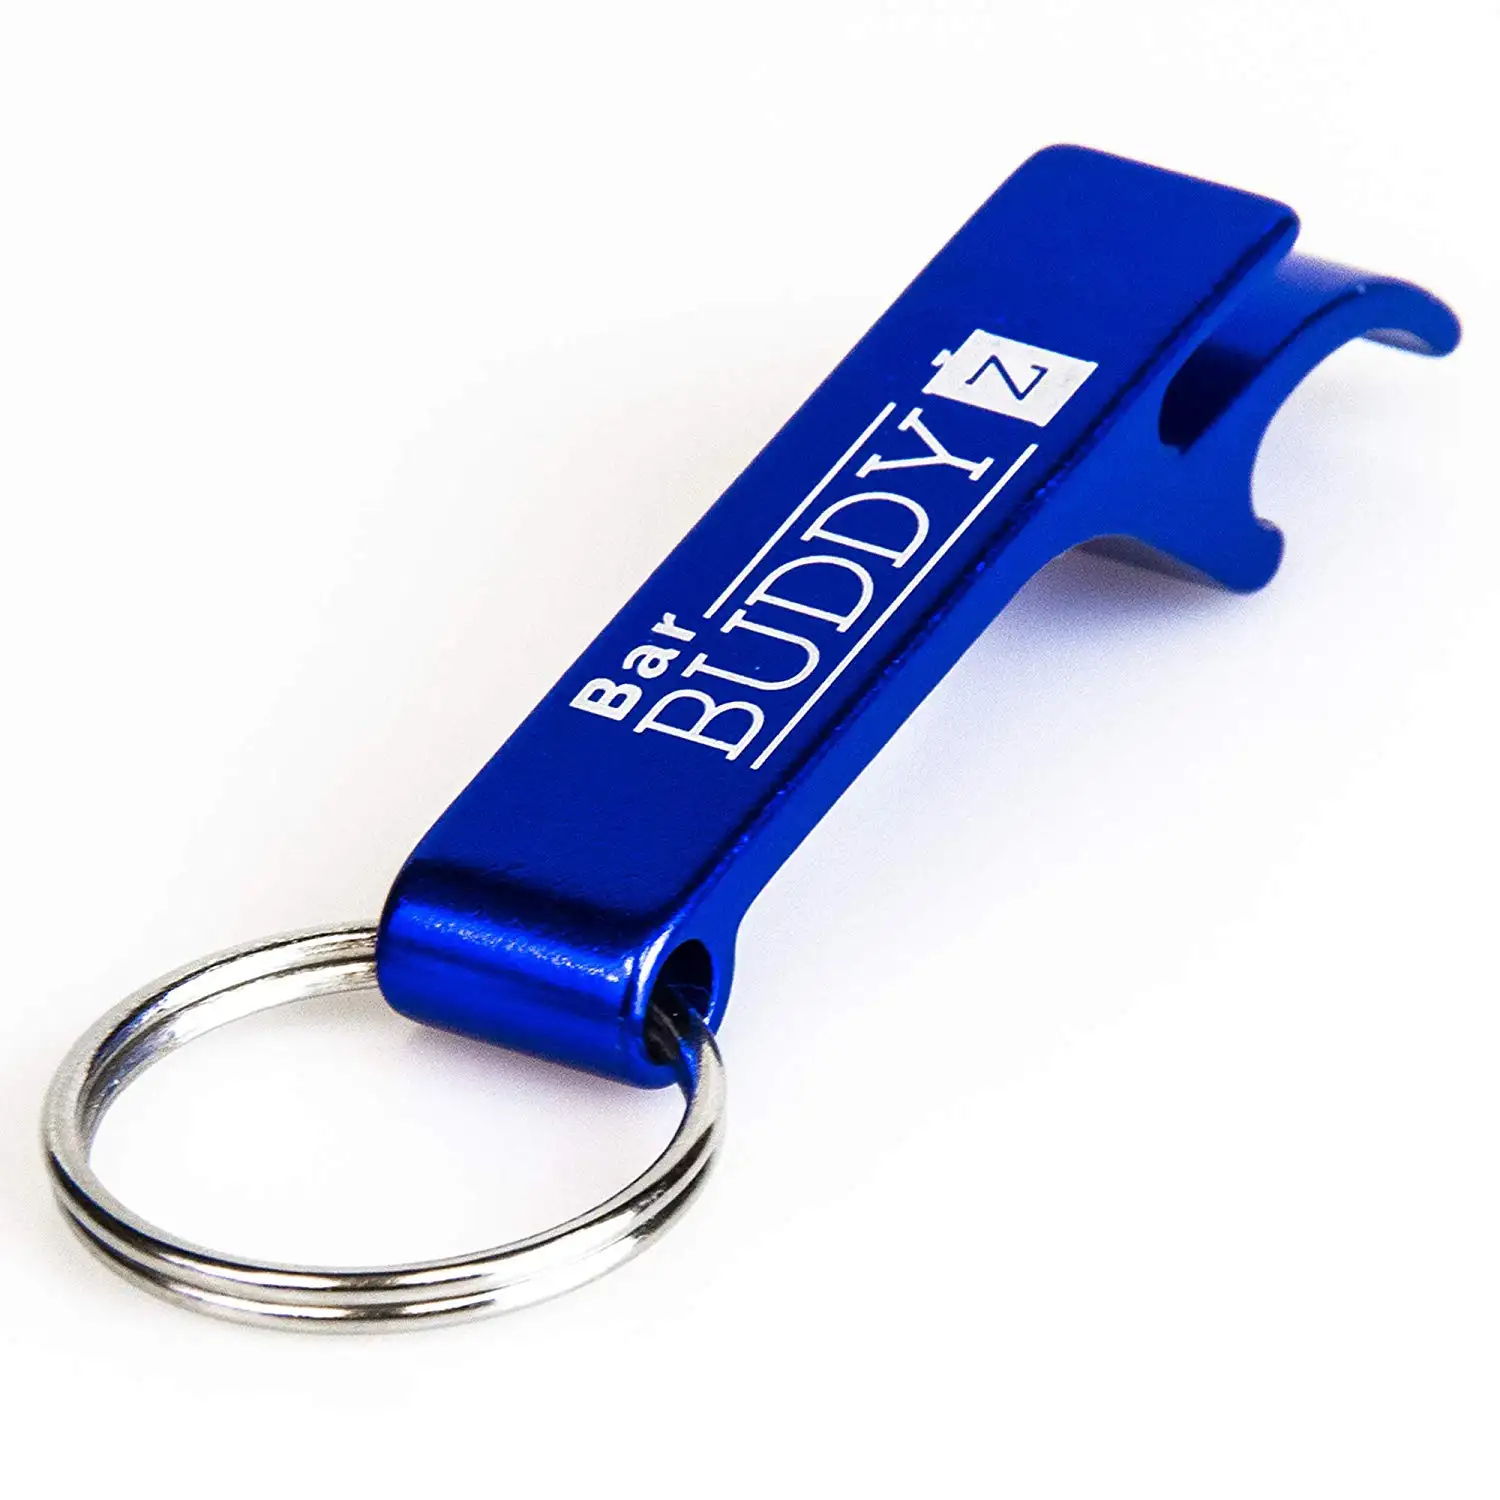 Custom metal bottle opener keychain with cheap price and fast delivery